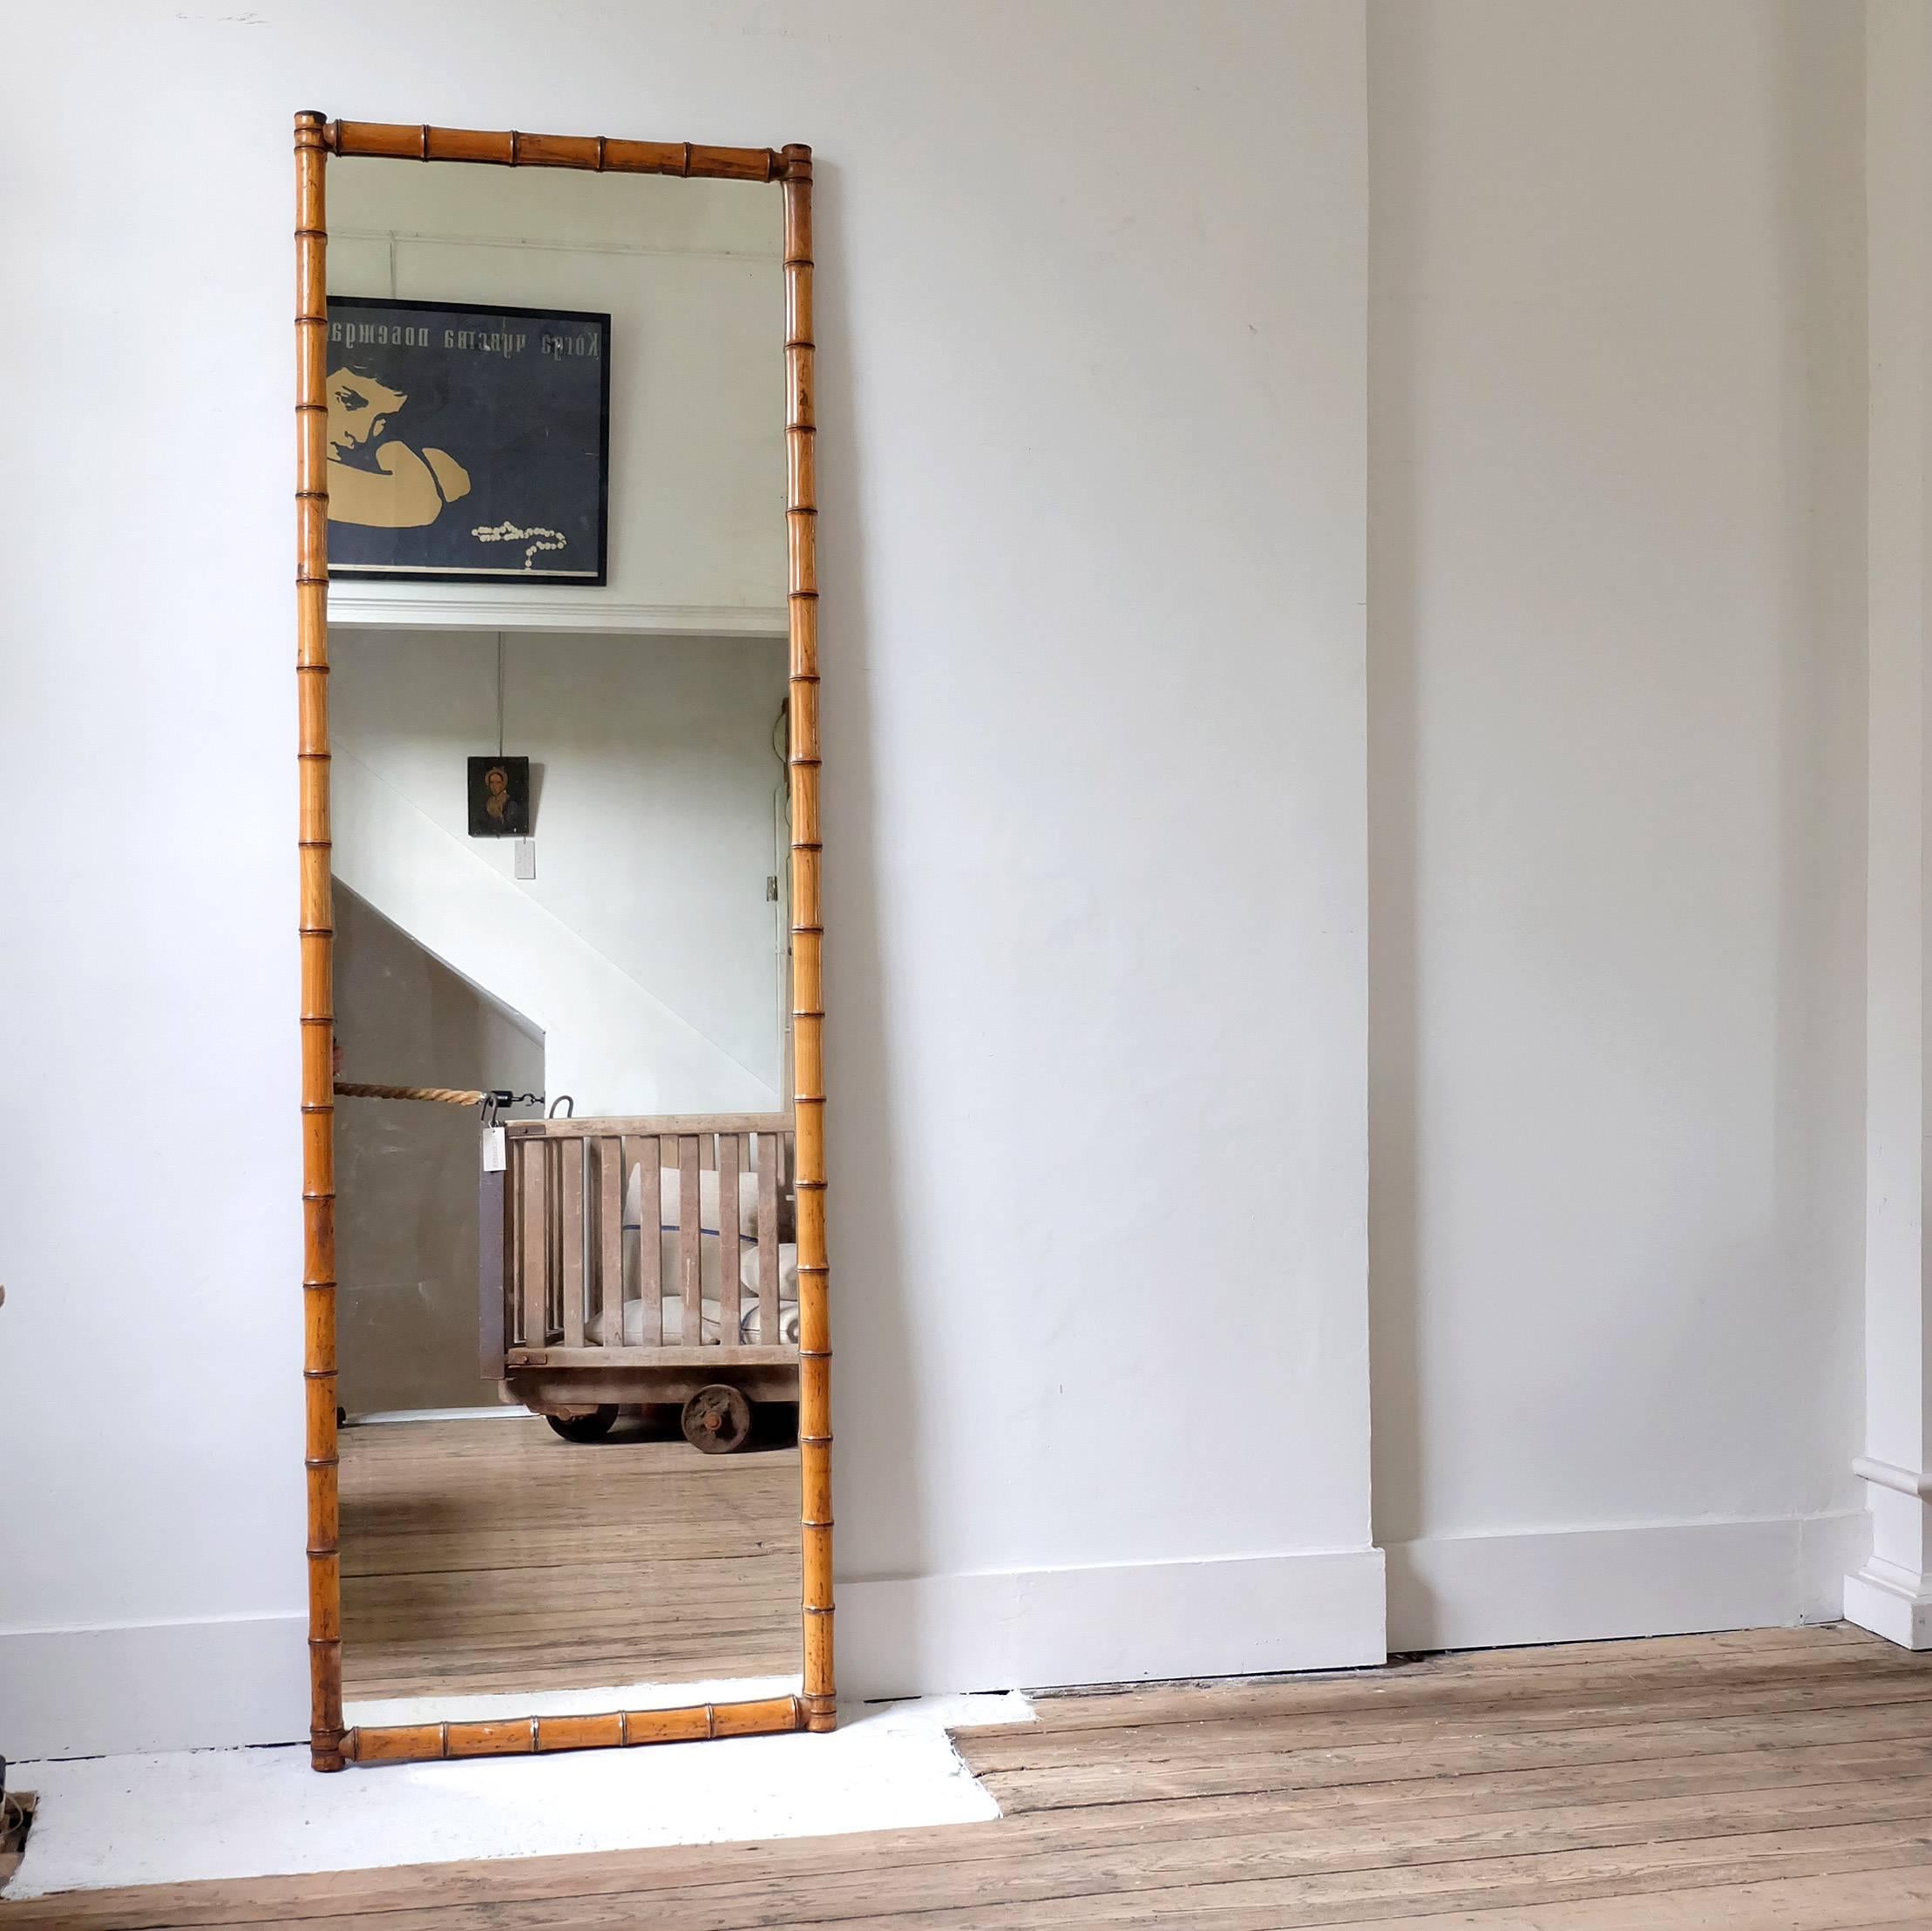 A stunning period French bamboo mirror with panelled back, circa 1890. I have never come across such a large bamboo mirror before, a real statement piece.